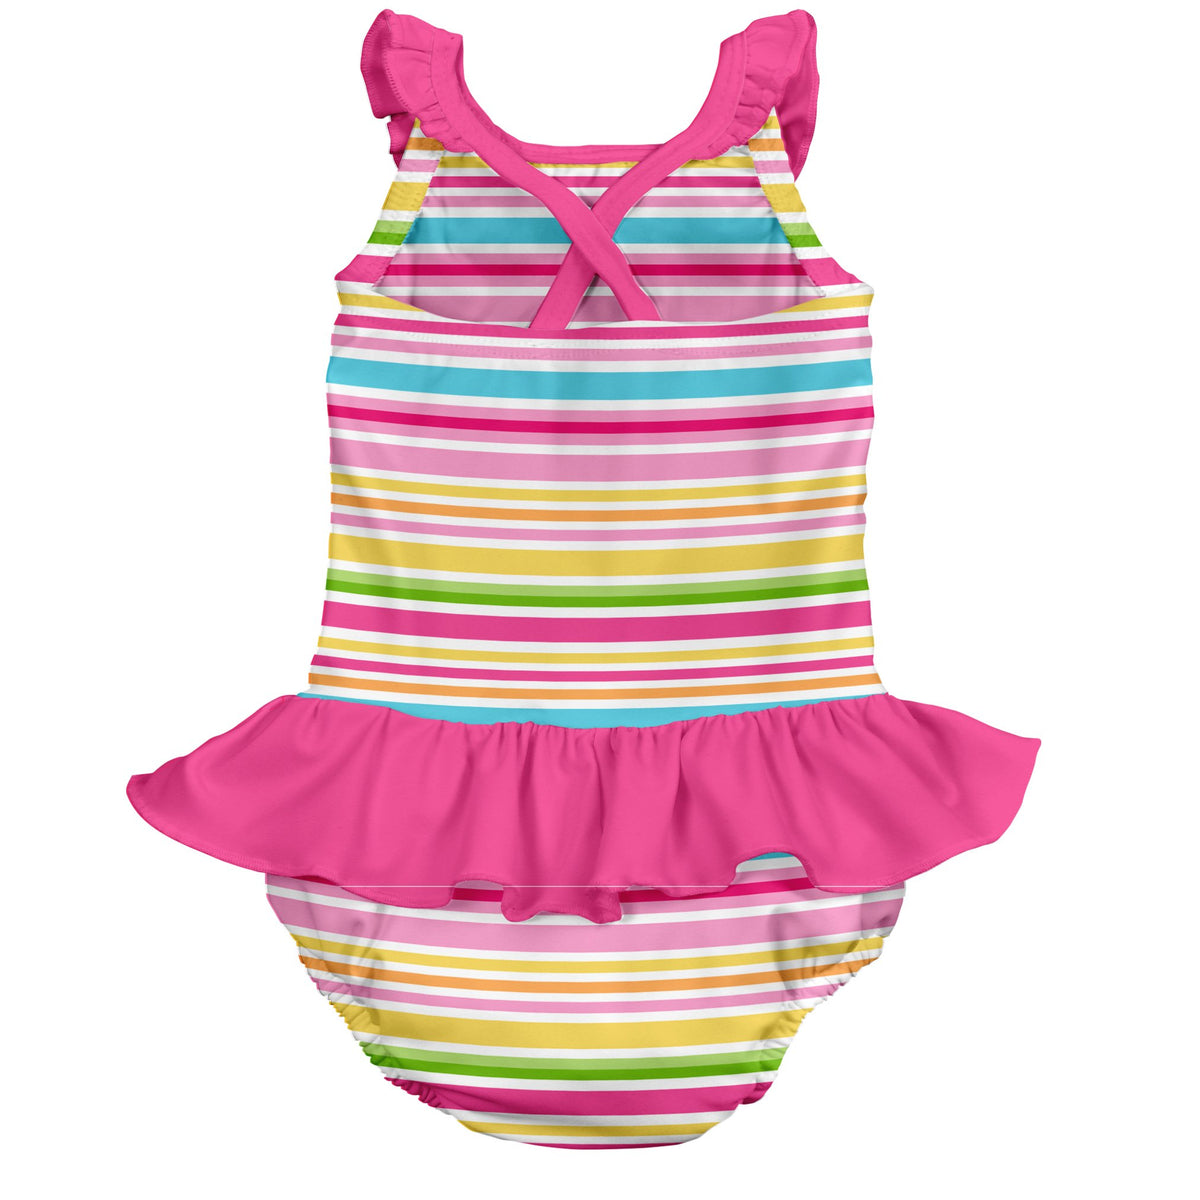 Ruffle Swimsuit with built in Swim Nappy - Pink Multi Stripe